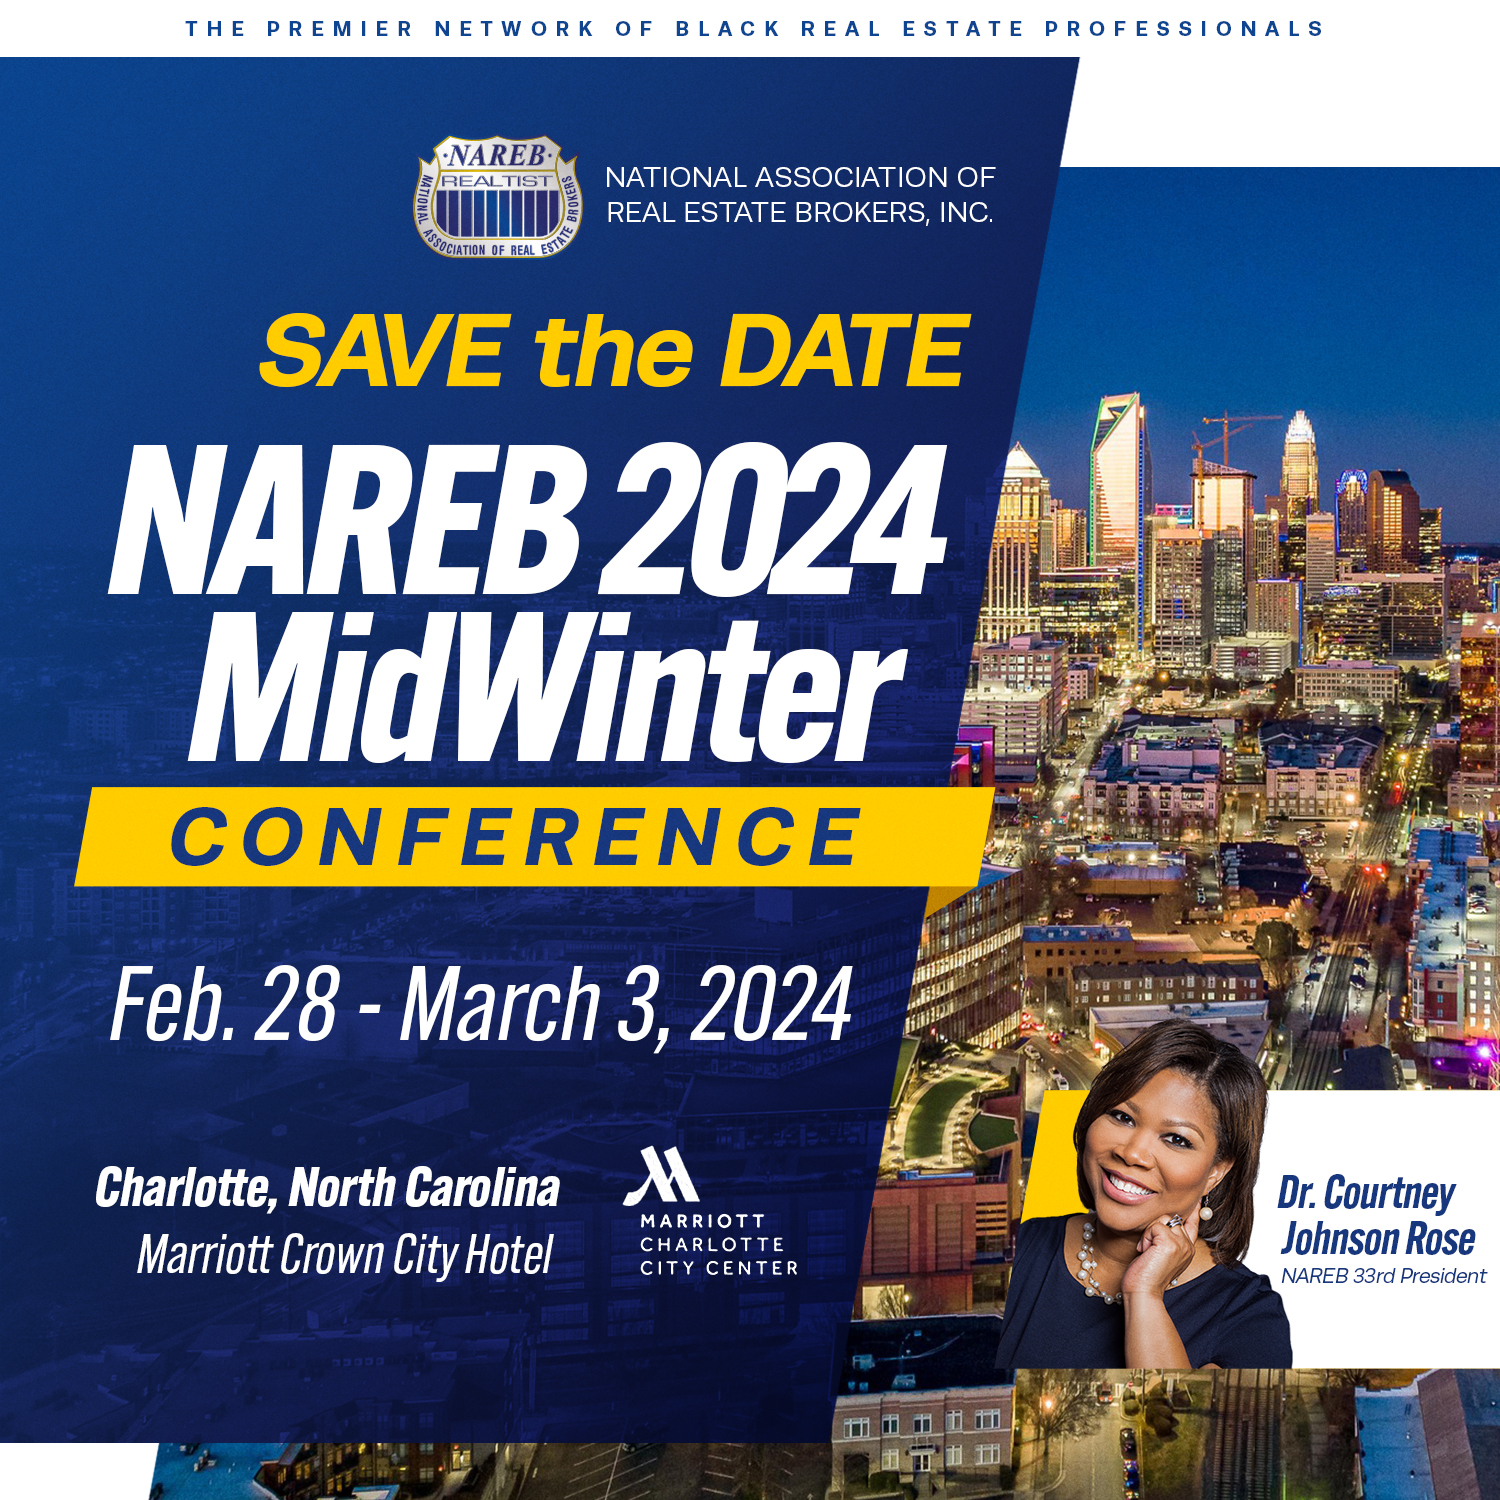 Save the Date for MidWinter 2024 National Association of Real Estate